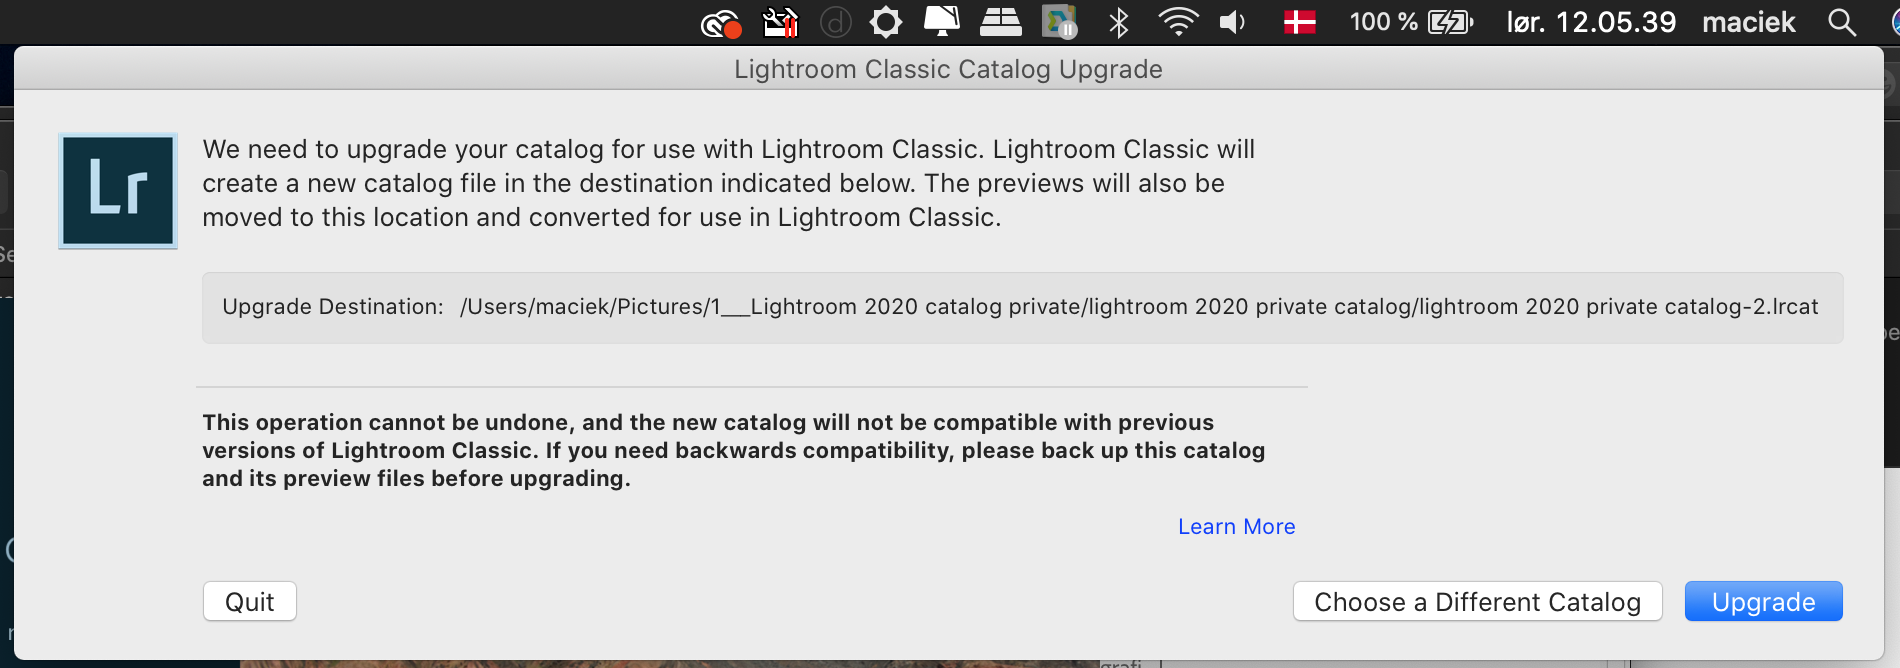 Lightroom upgrade from 8.4.1 to 9.2 (only one-way)